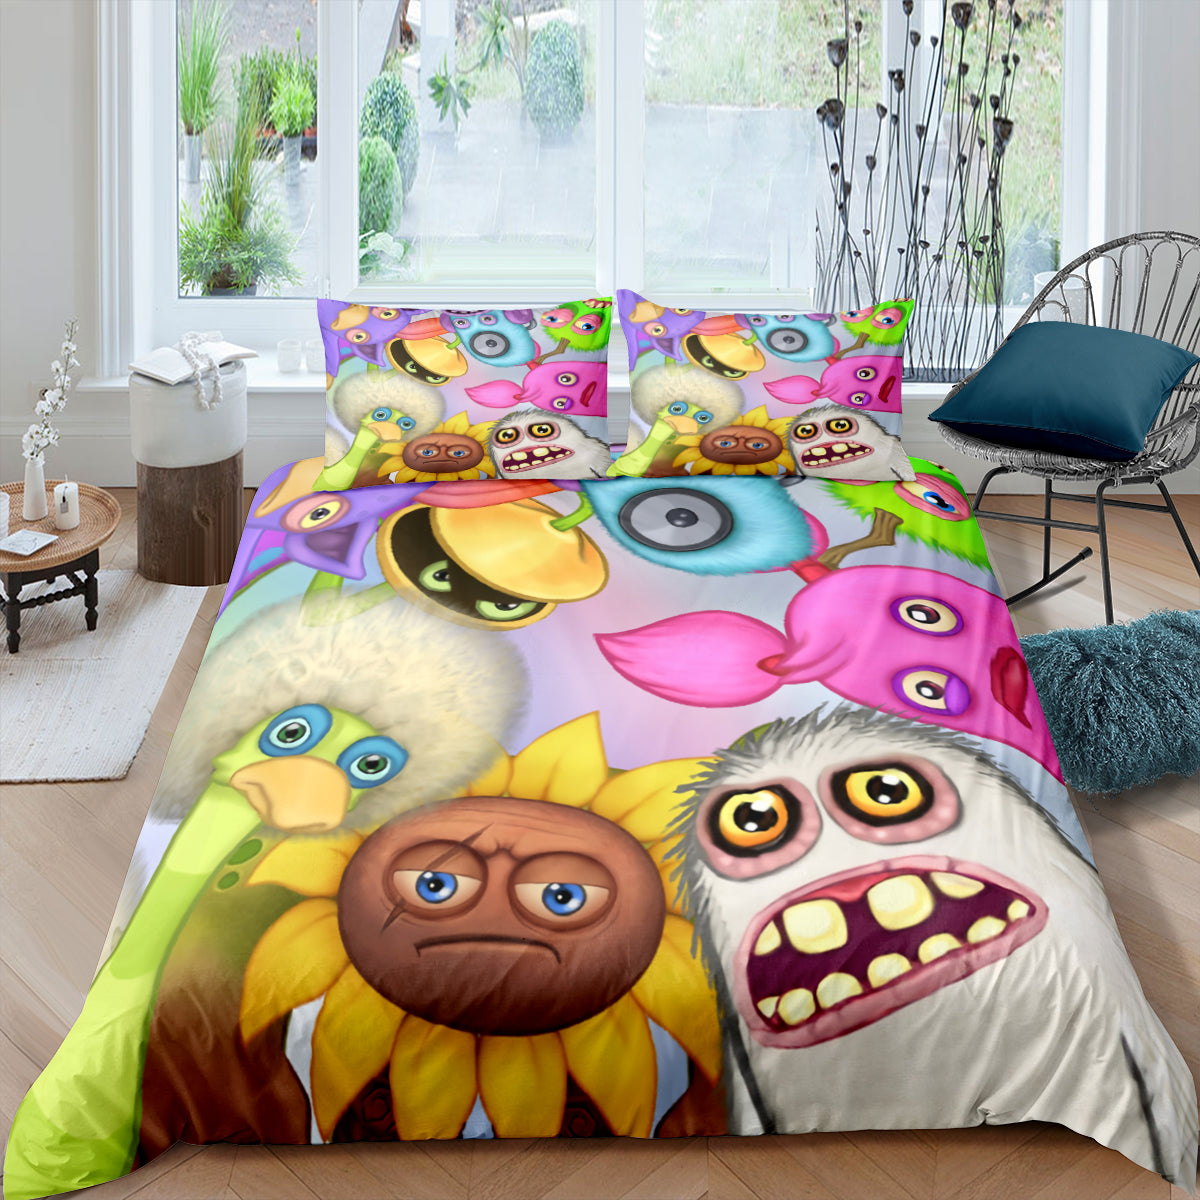 My Singing Monsters #5 3D Printed Duvet Cover Quilt Cover Pillowcase Bedding Set Bed Linen Home Decor